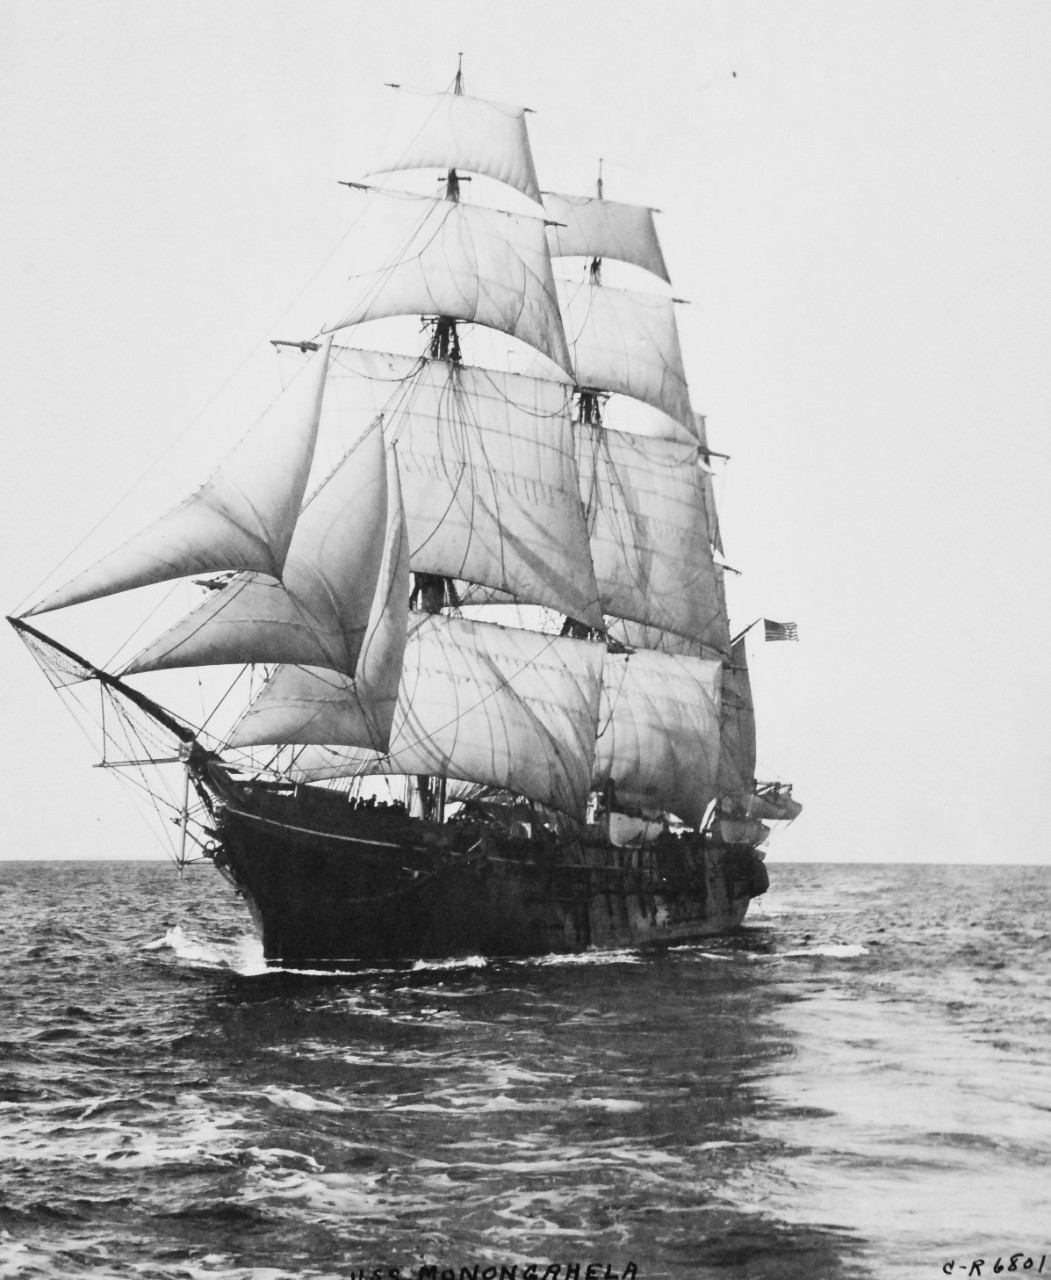 19-N-6801:  USS Monongahela later 1890s    Port view while under sail while serving as the U.S. Naval Academy Practice Ship.   Official U.S. Navy Photograph, now in the collections of the National Archives.   (2014/7/10).